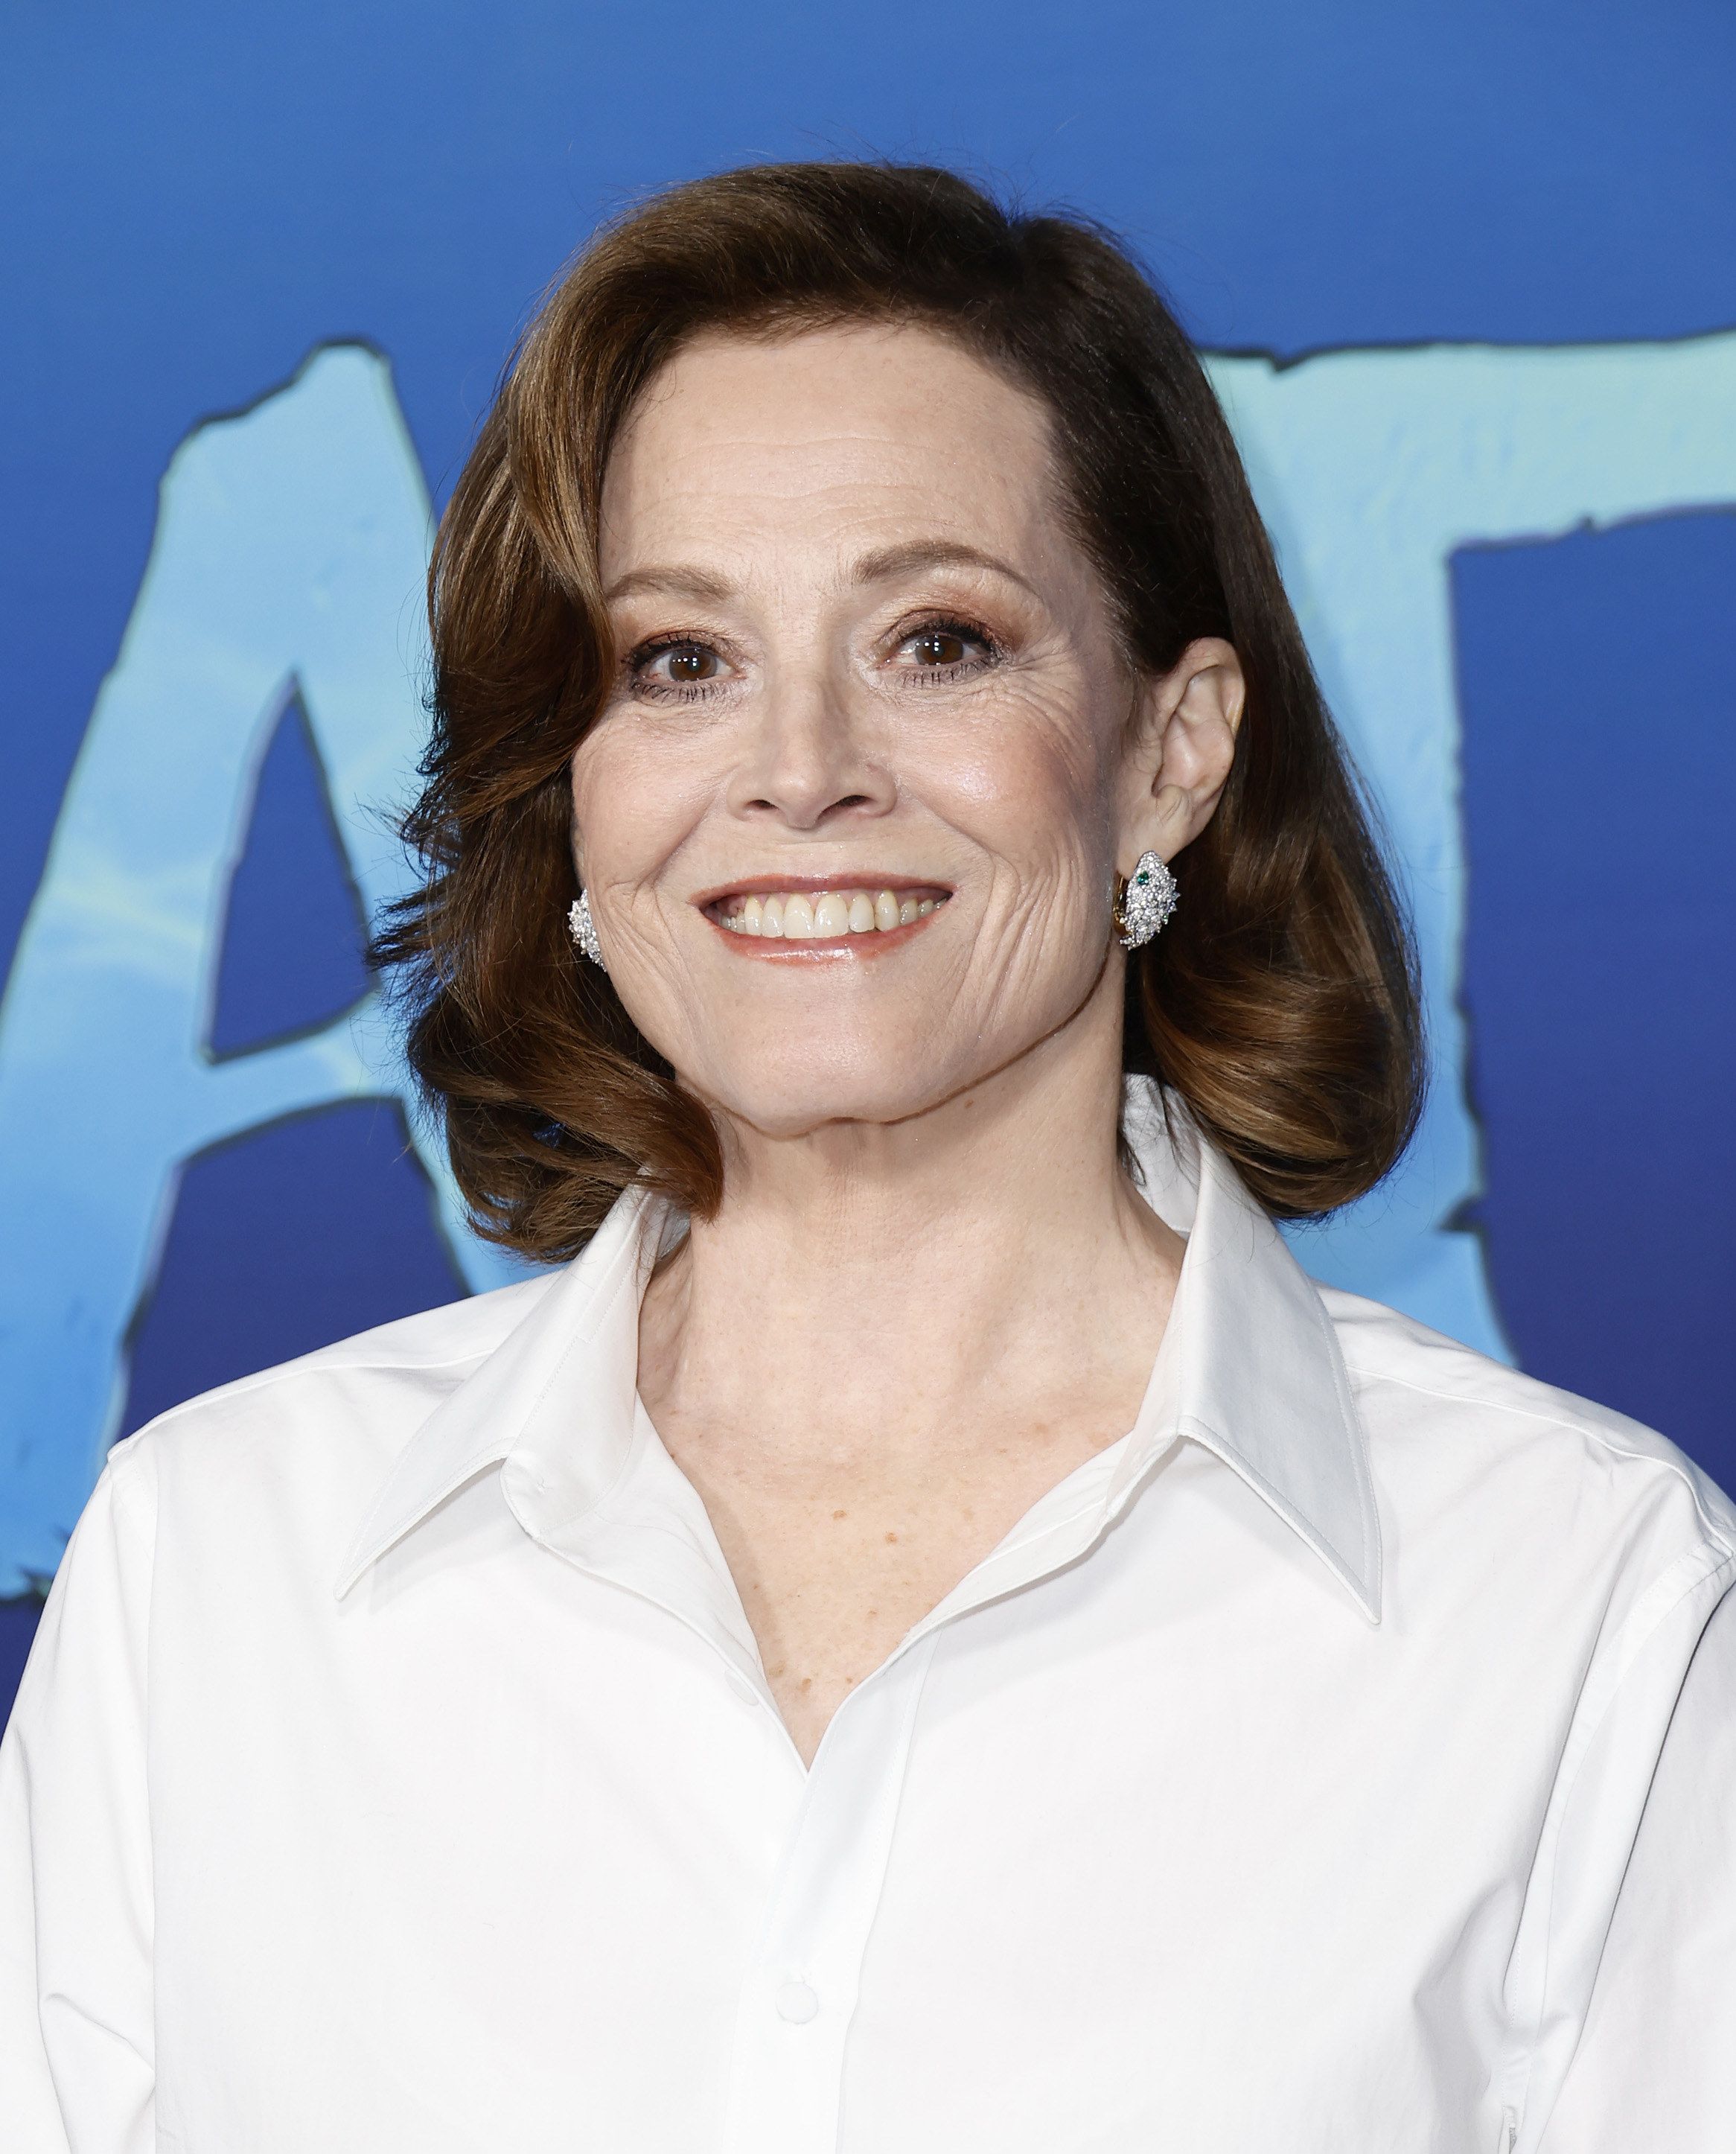 Sigourney Weaver on the red carpet